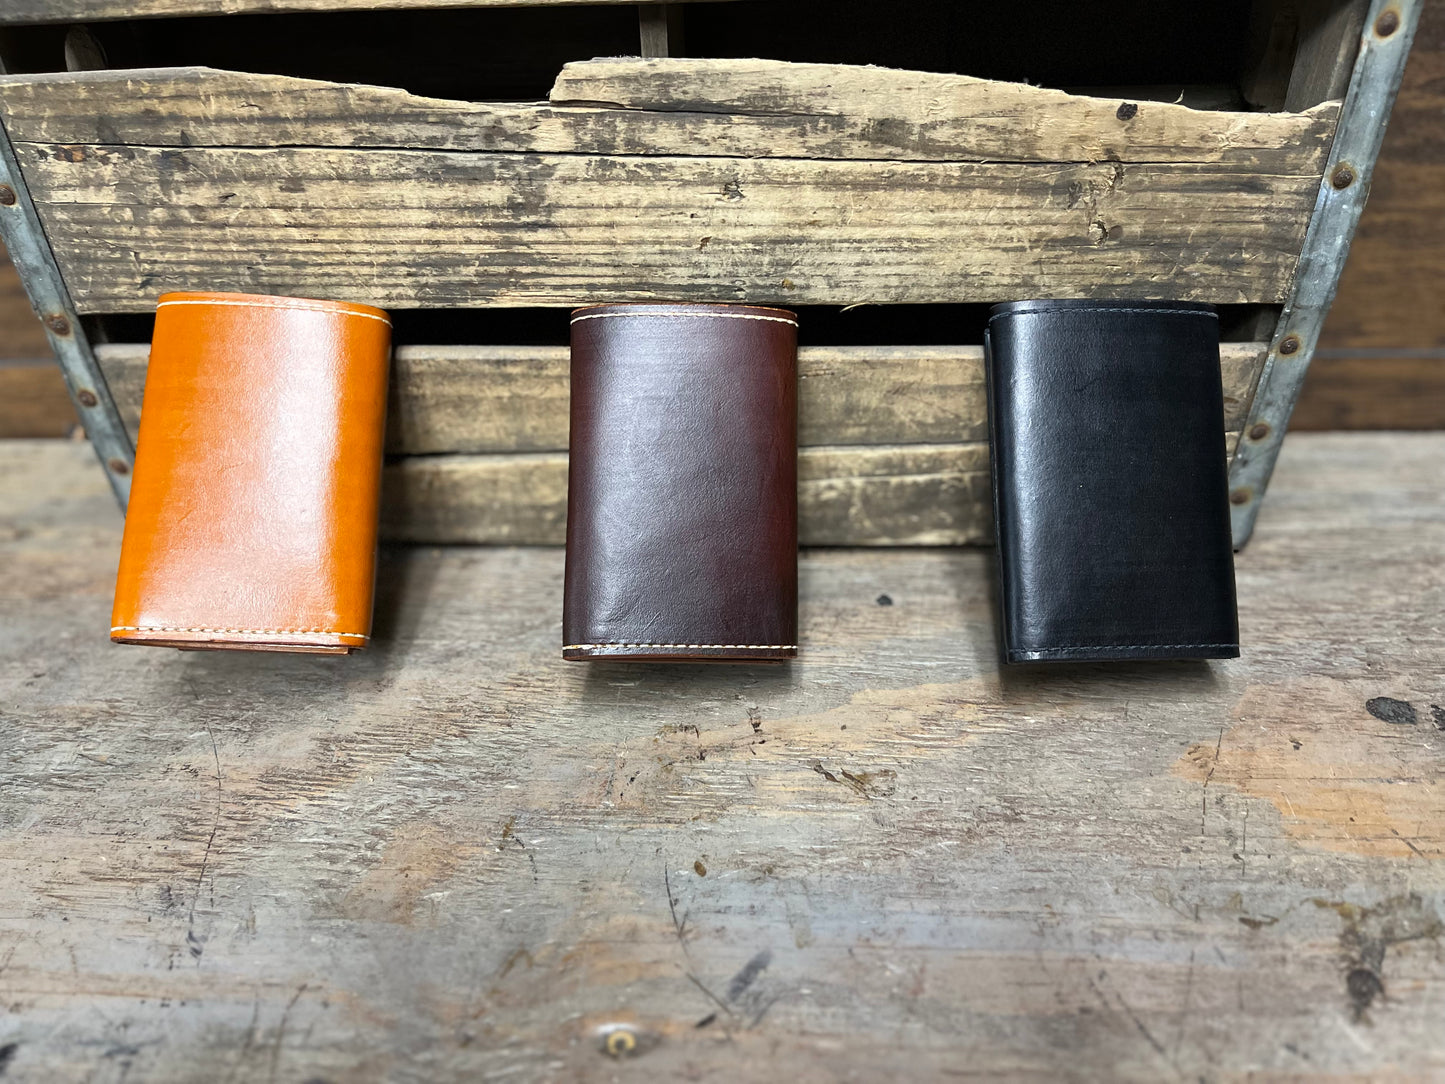 LEATHER GOODS HAND MADE